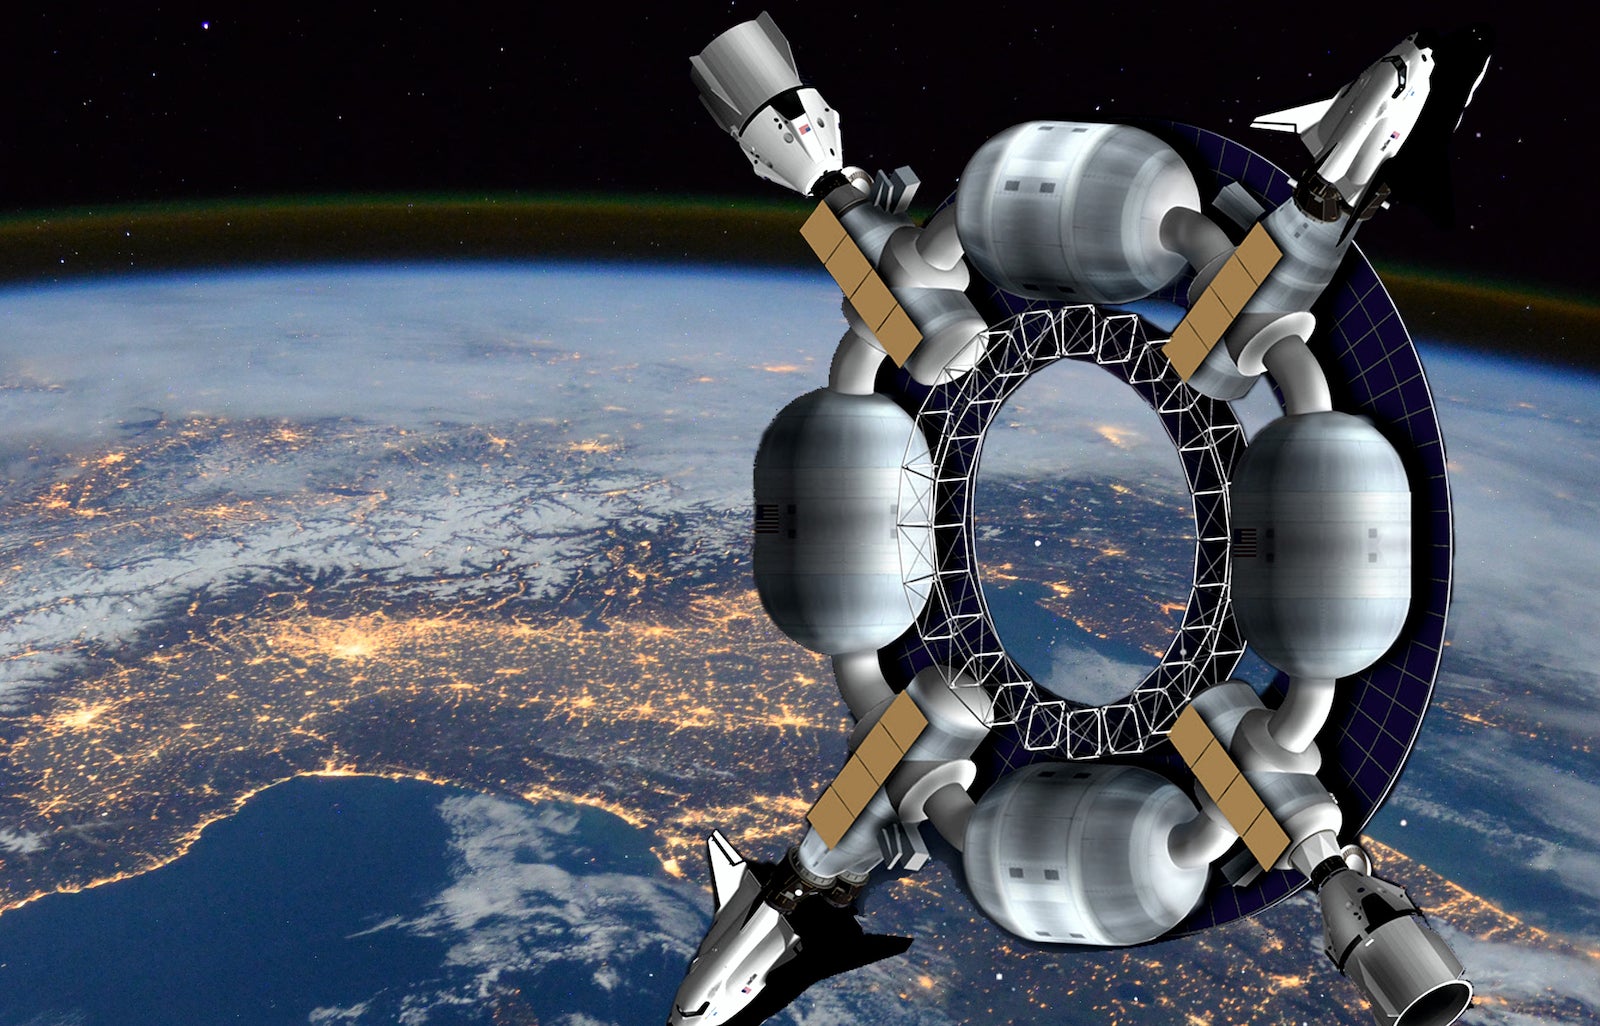 Hotel in outer space slated for 2025 opening